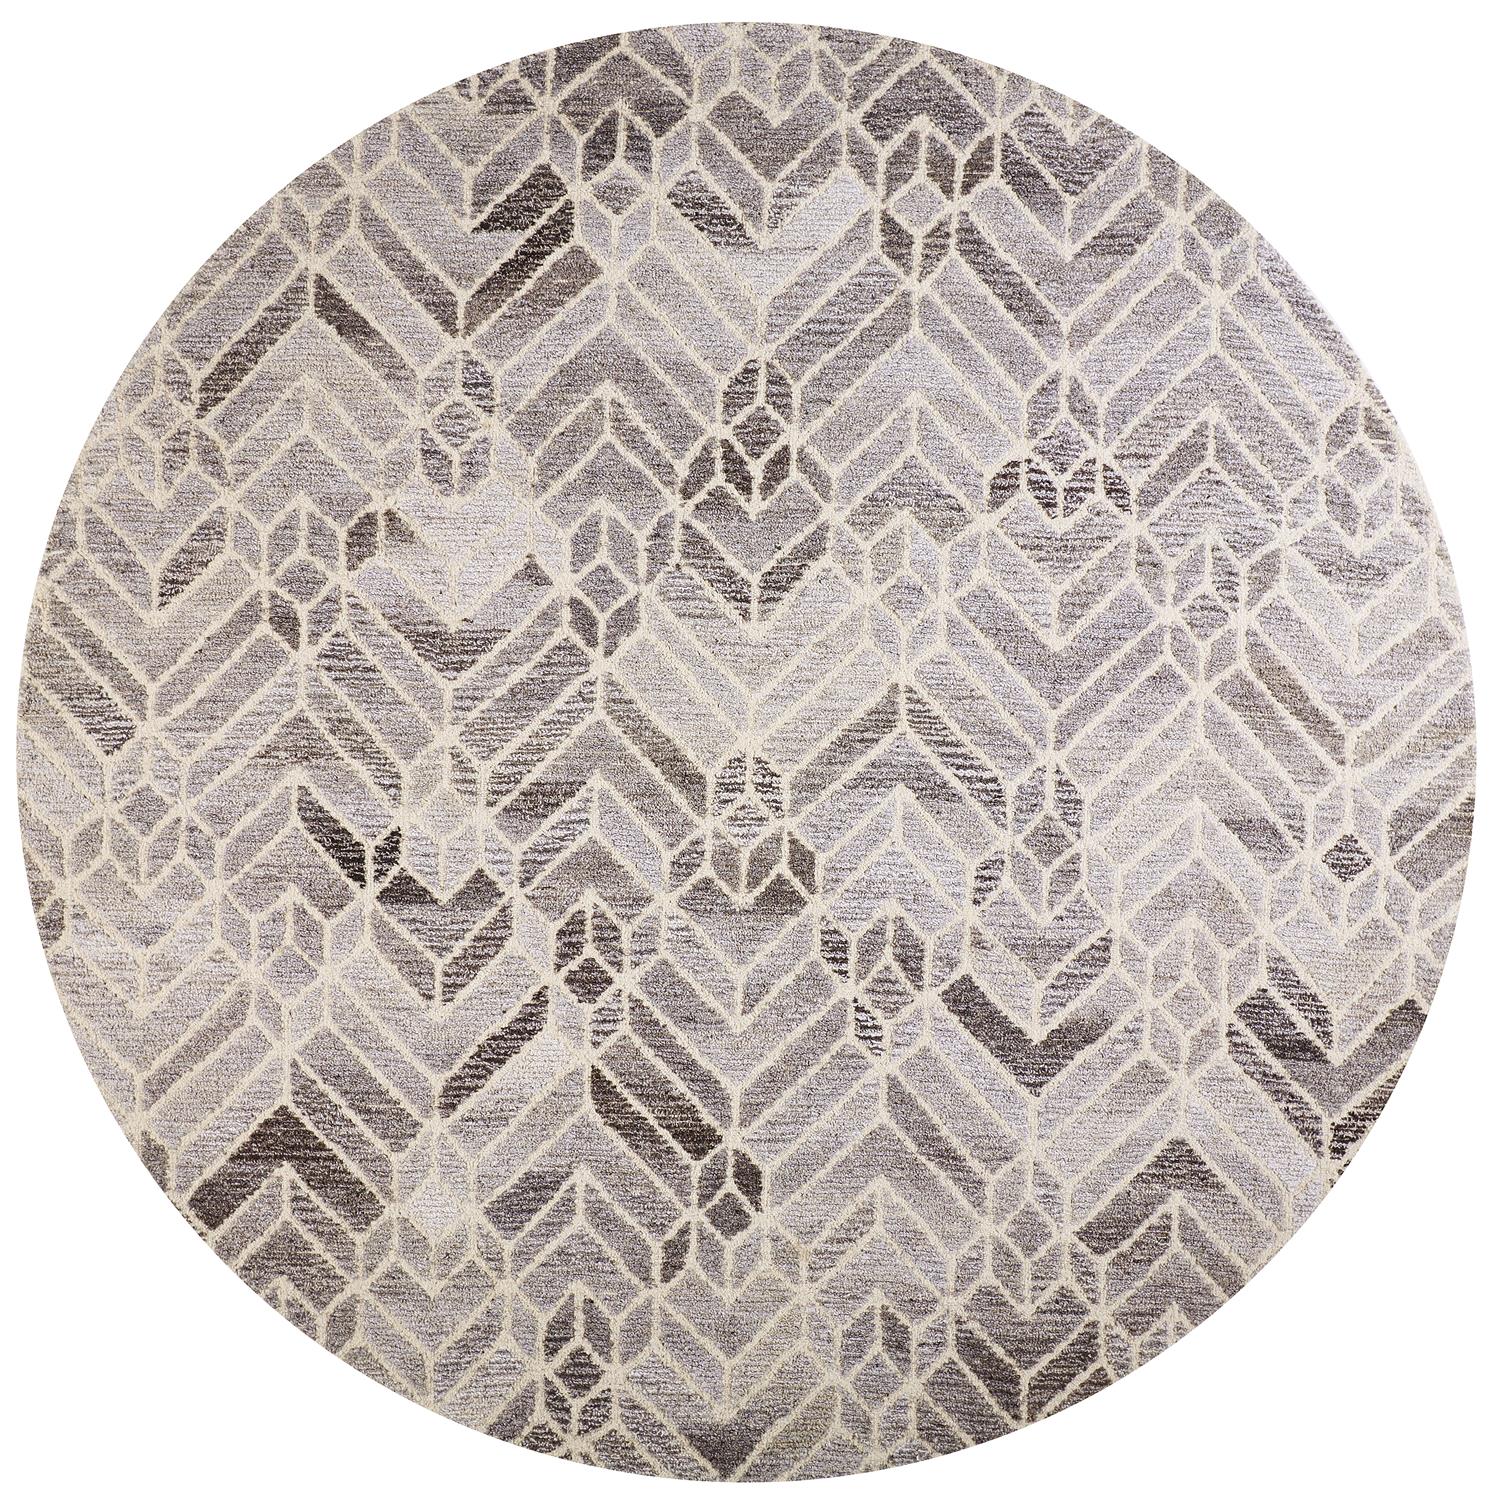 Round accent rug - Contemporary grey on grey with geometric design - Find it locally here in Santa Clara